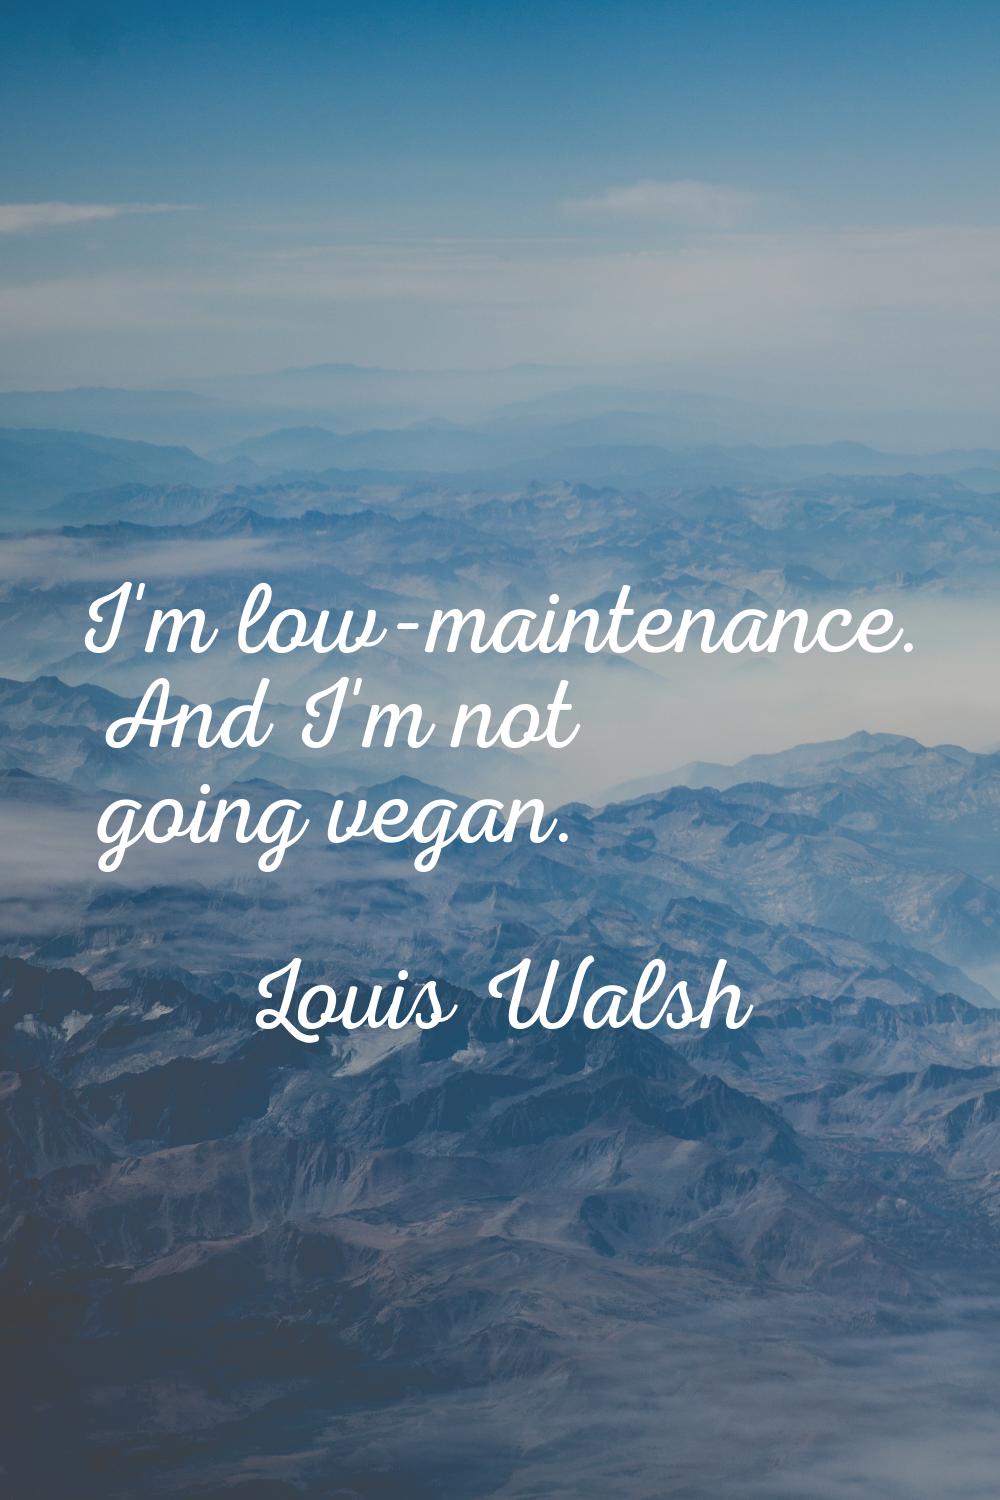 I'm low-maintenance. And I'm not going vegan.